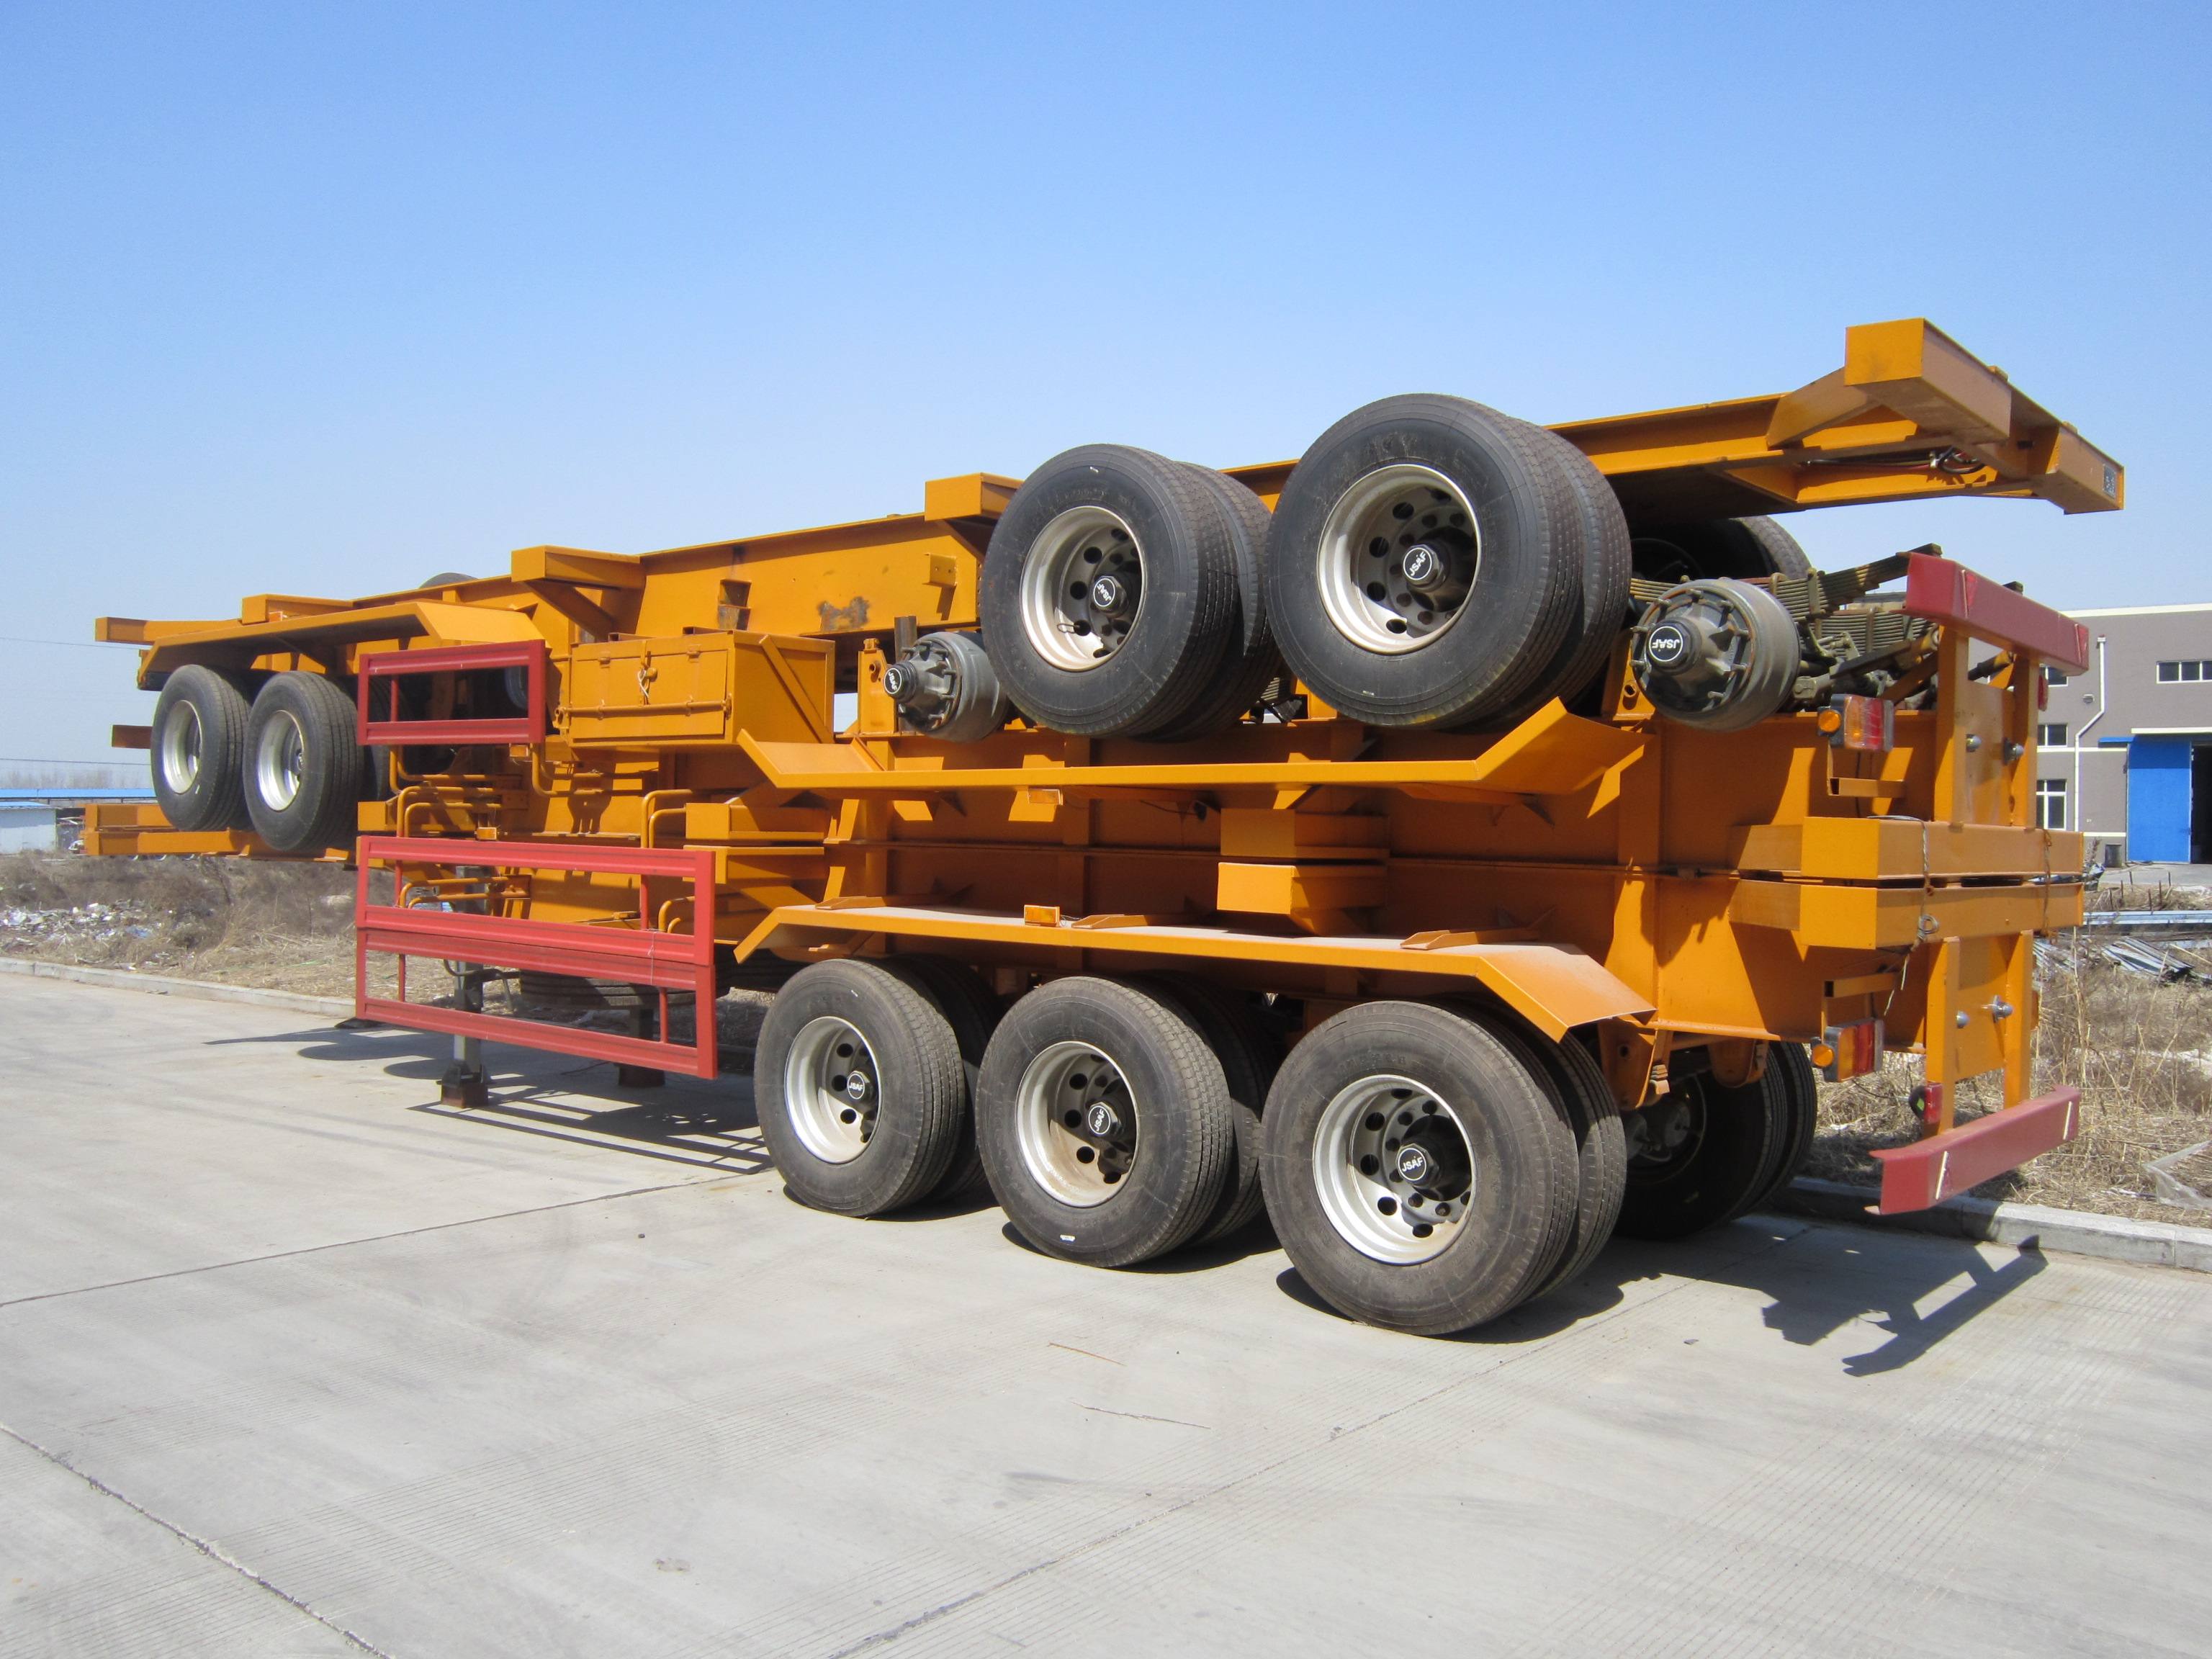 China made 3 axles 20ft 40ft container semi-trailer for freight transporting